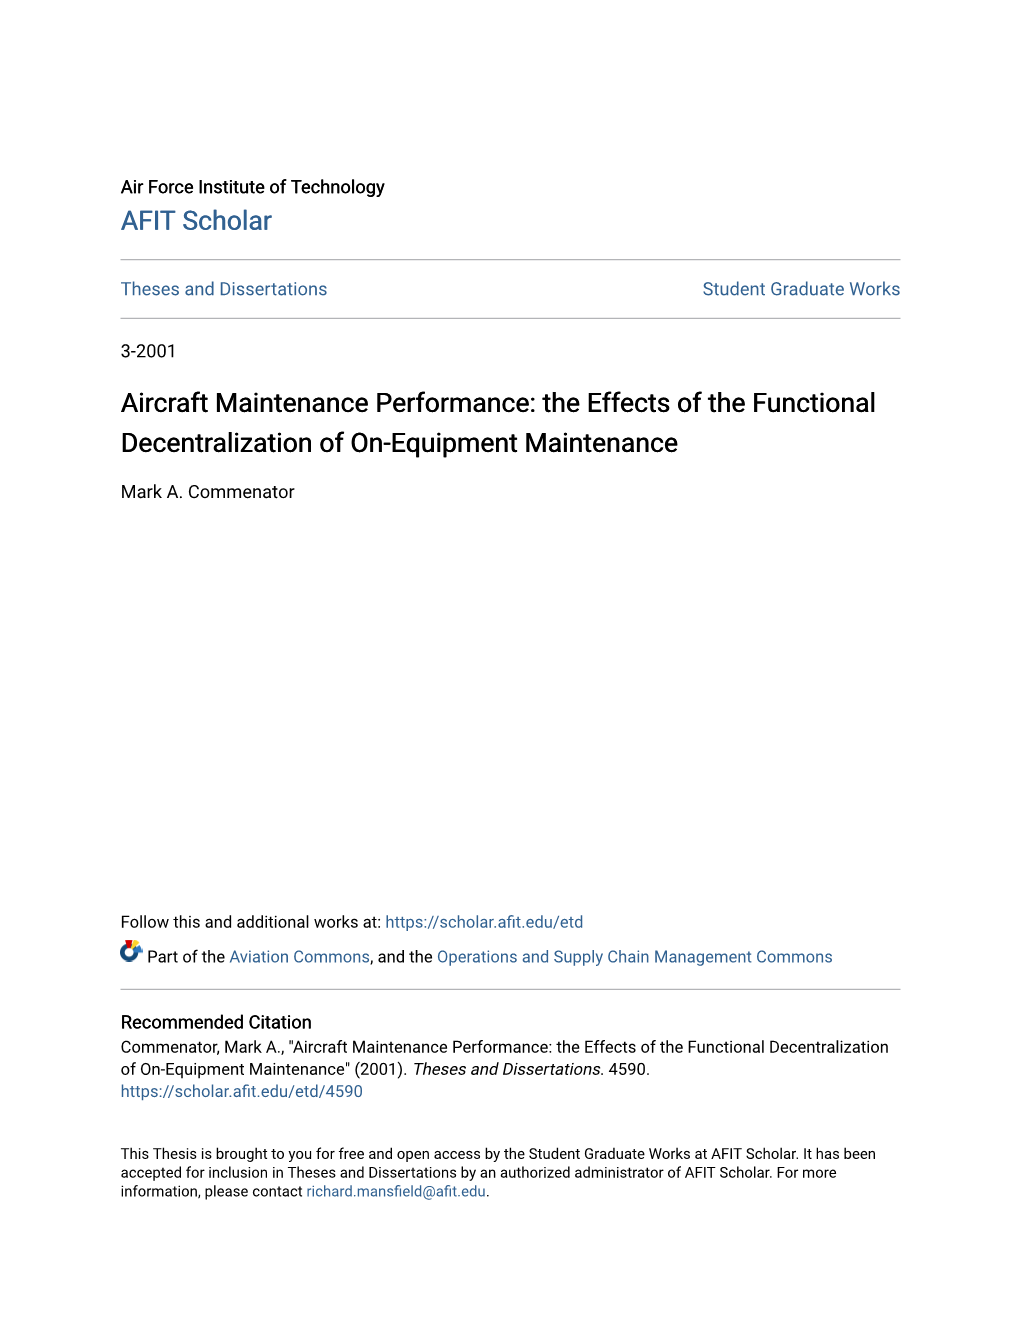 Aircraft Maintenance Performance: the Effects of the Functional Decentralization of On-Equipment Maintenance